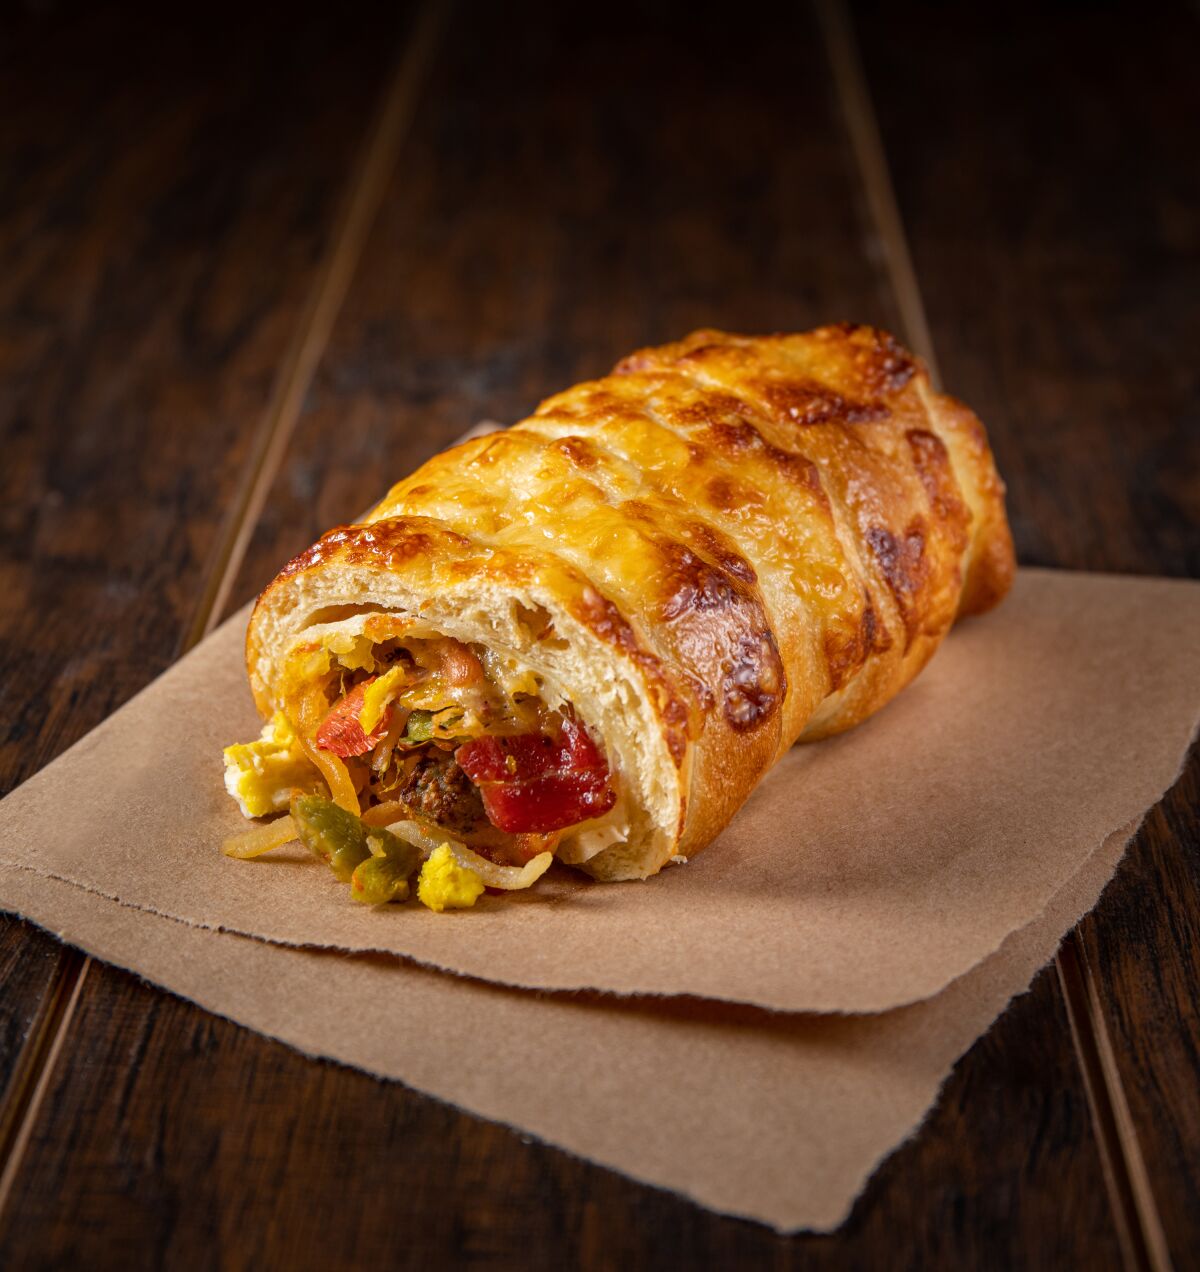 Einstein Bros. Bagel launches a first-of-its-kind bagel innovation, the Bagelrito.